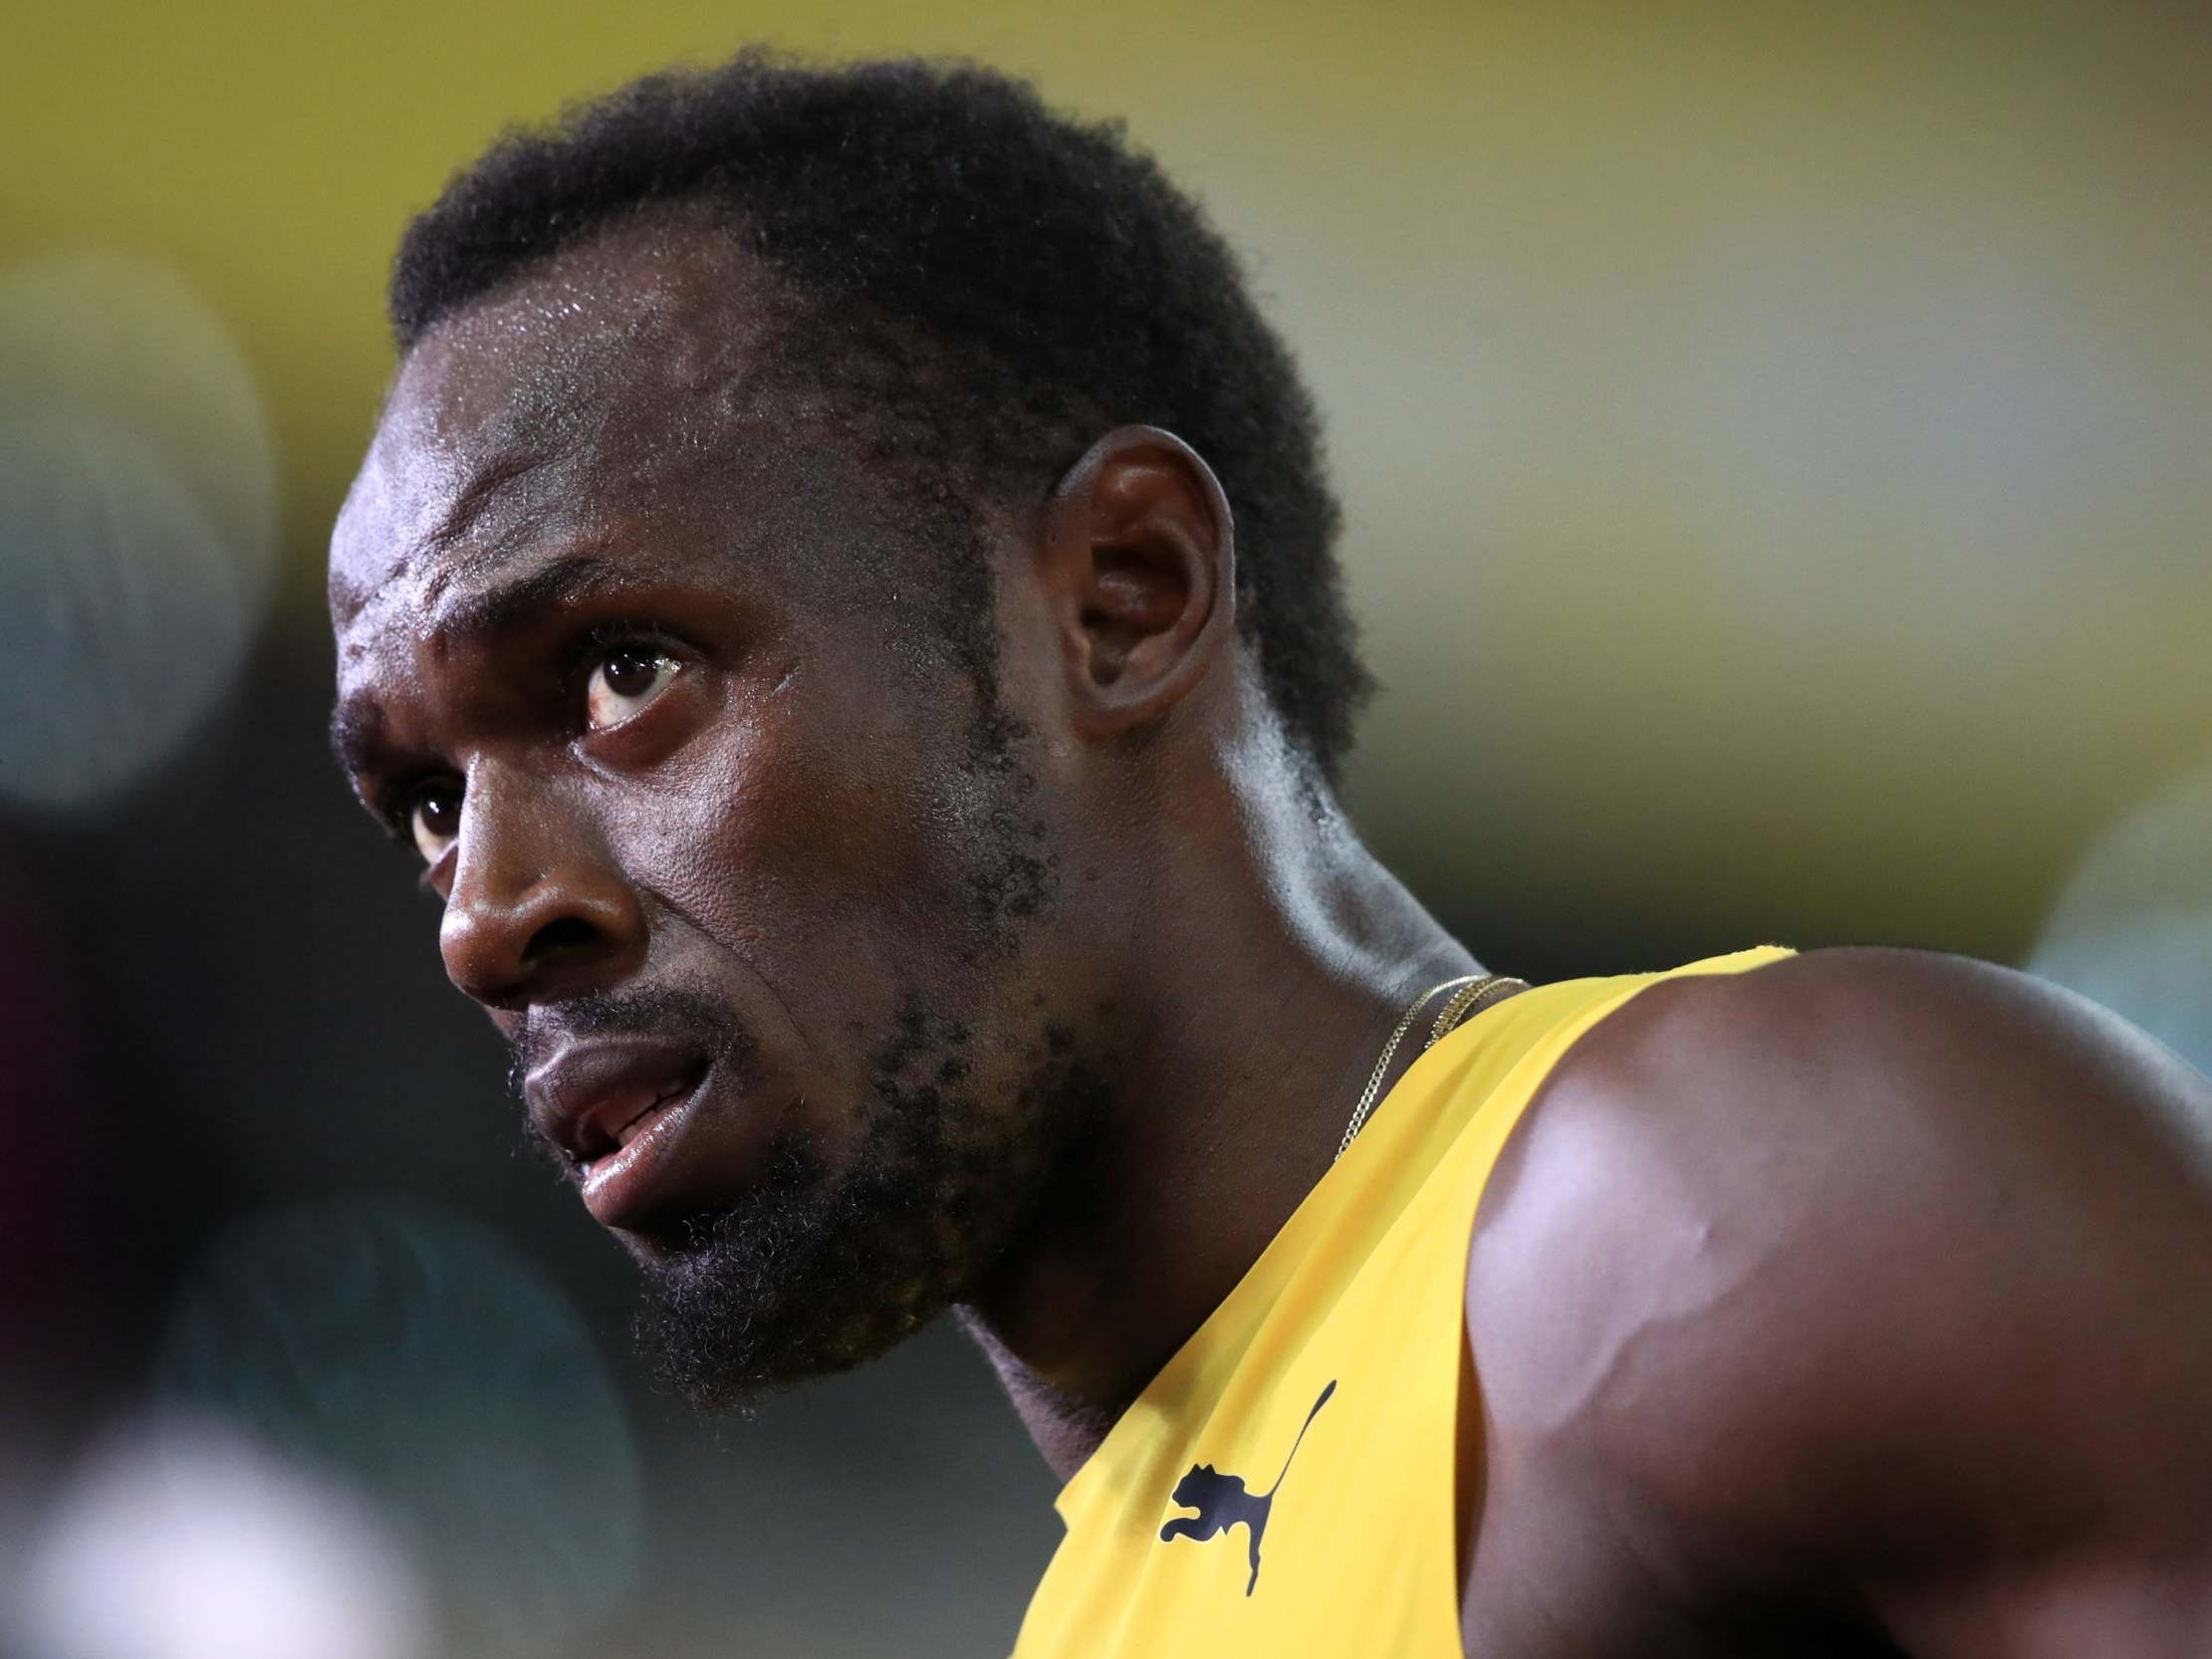 Usain Bolt said he had not symptoms when he was tested